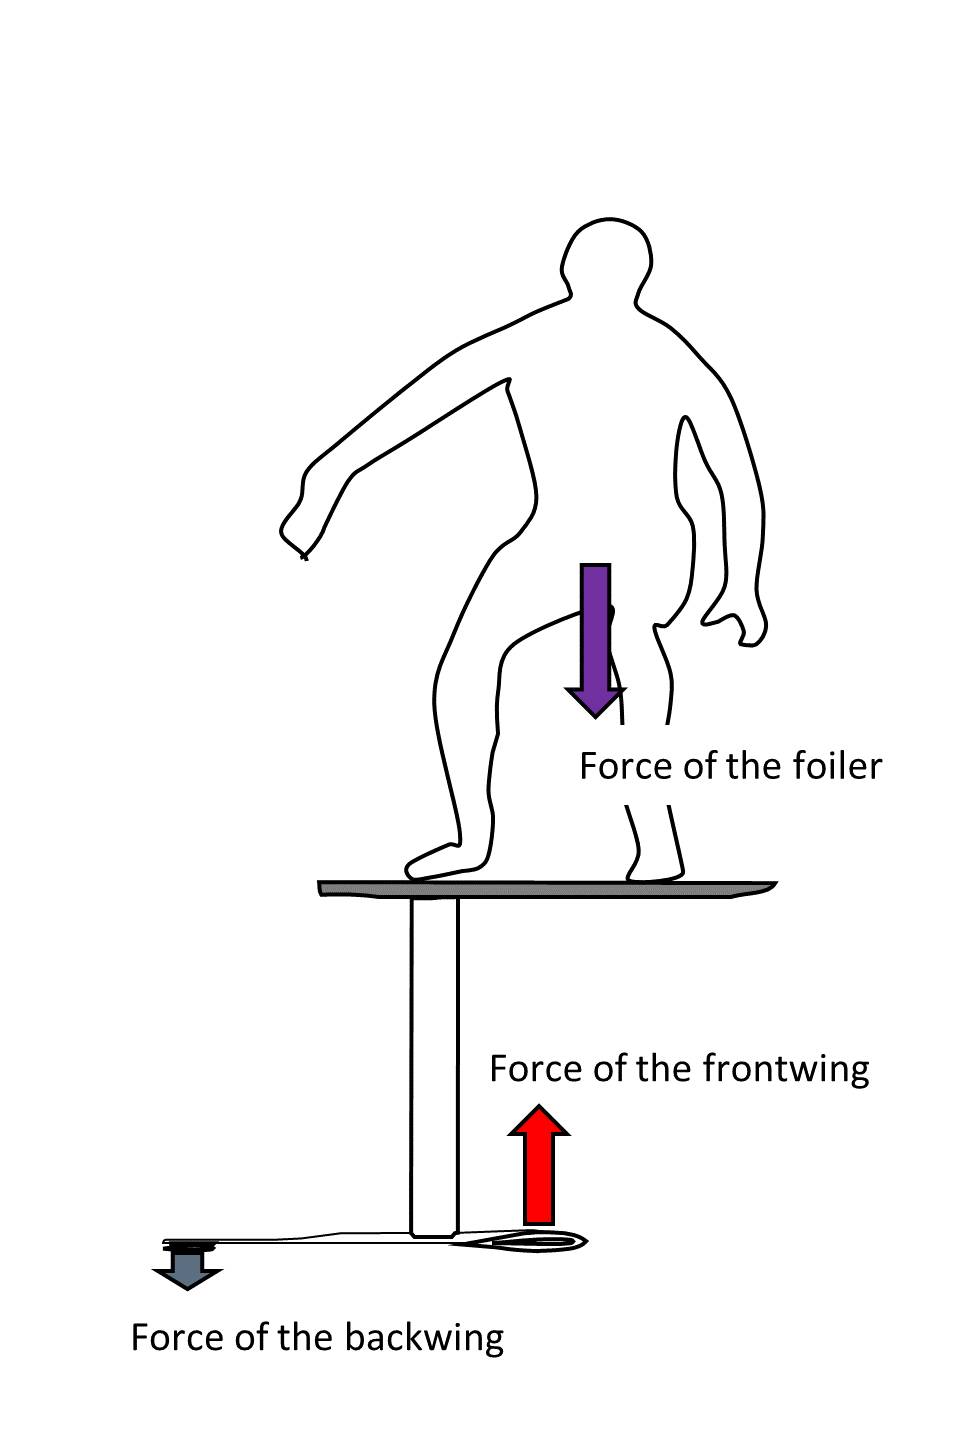 Force of the backwing, frontwing and the foiler